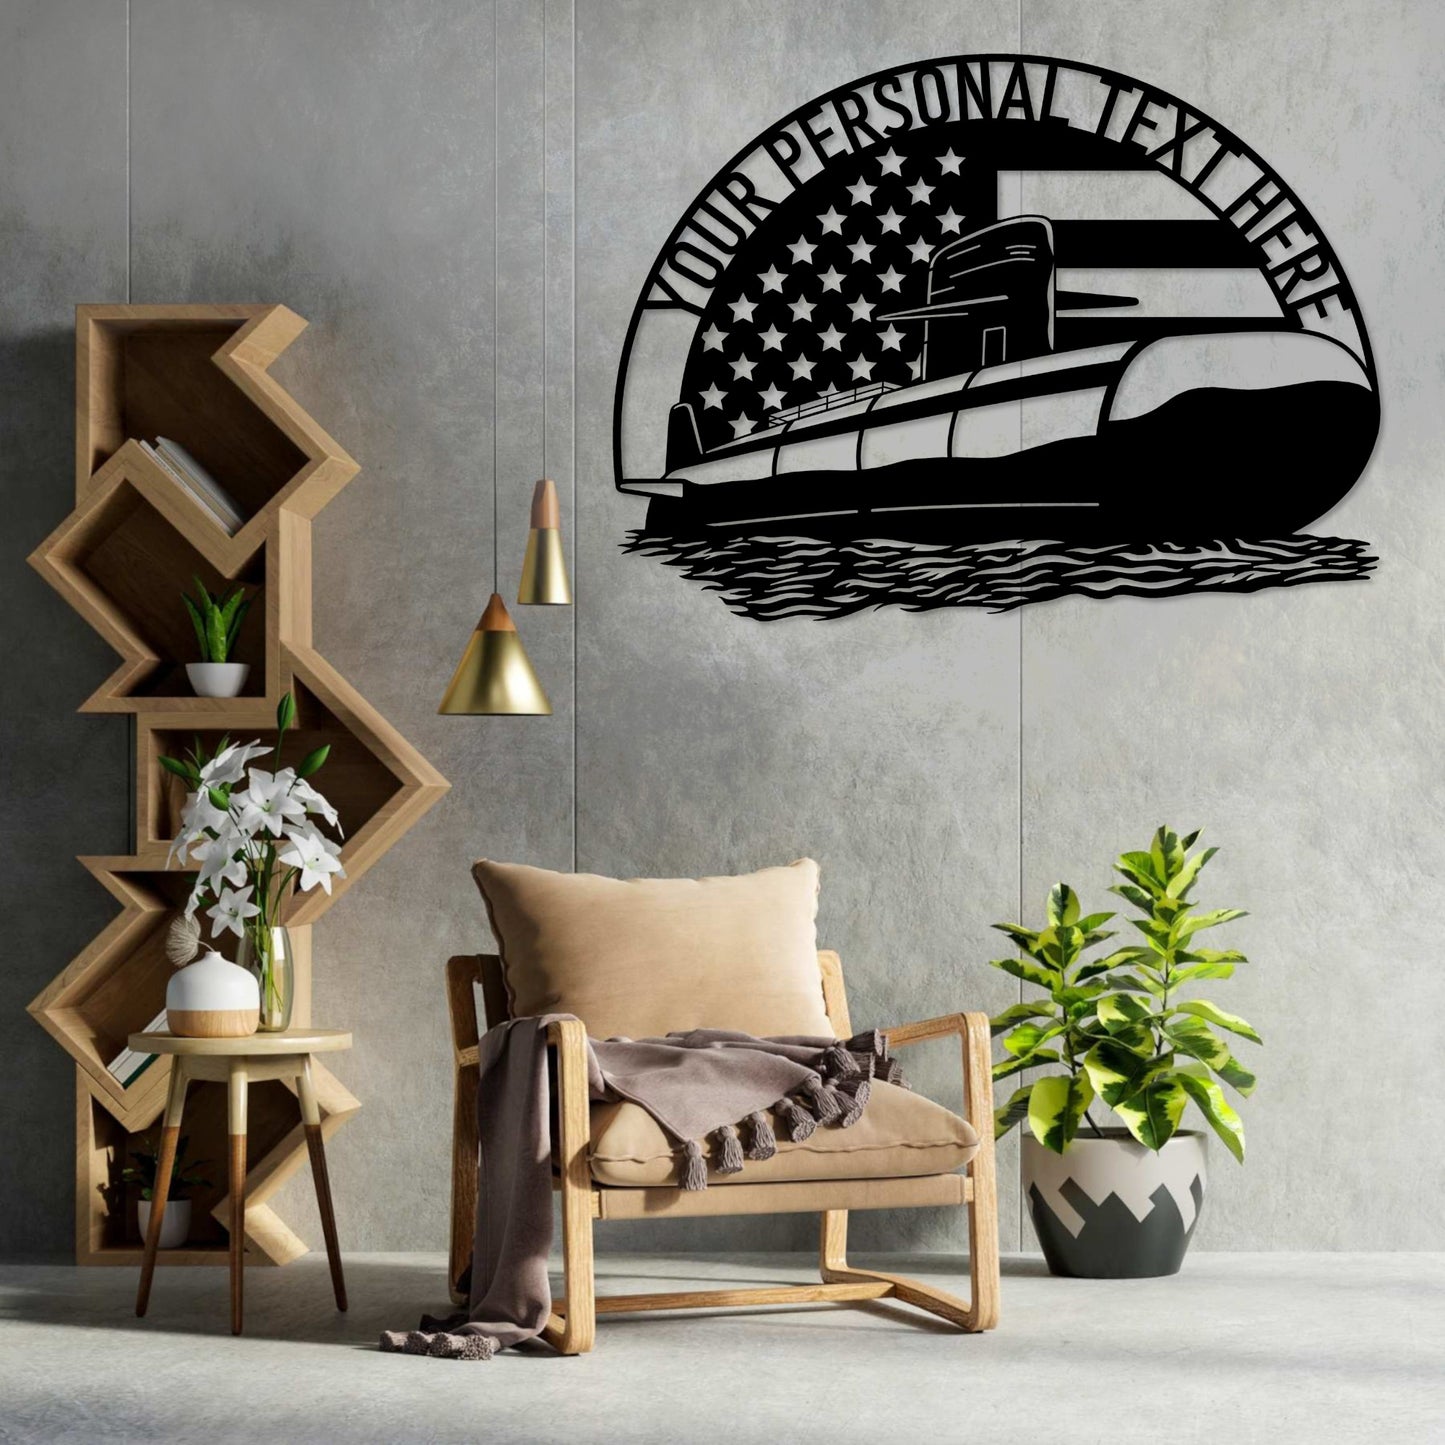 Personalized American Submarine Metal Sign. Custom Navy Wall Decor Gift. U-Boat Monogram. Military Wall Hanging. US Soldier Retirement Gift